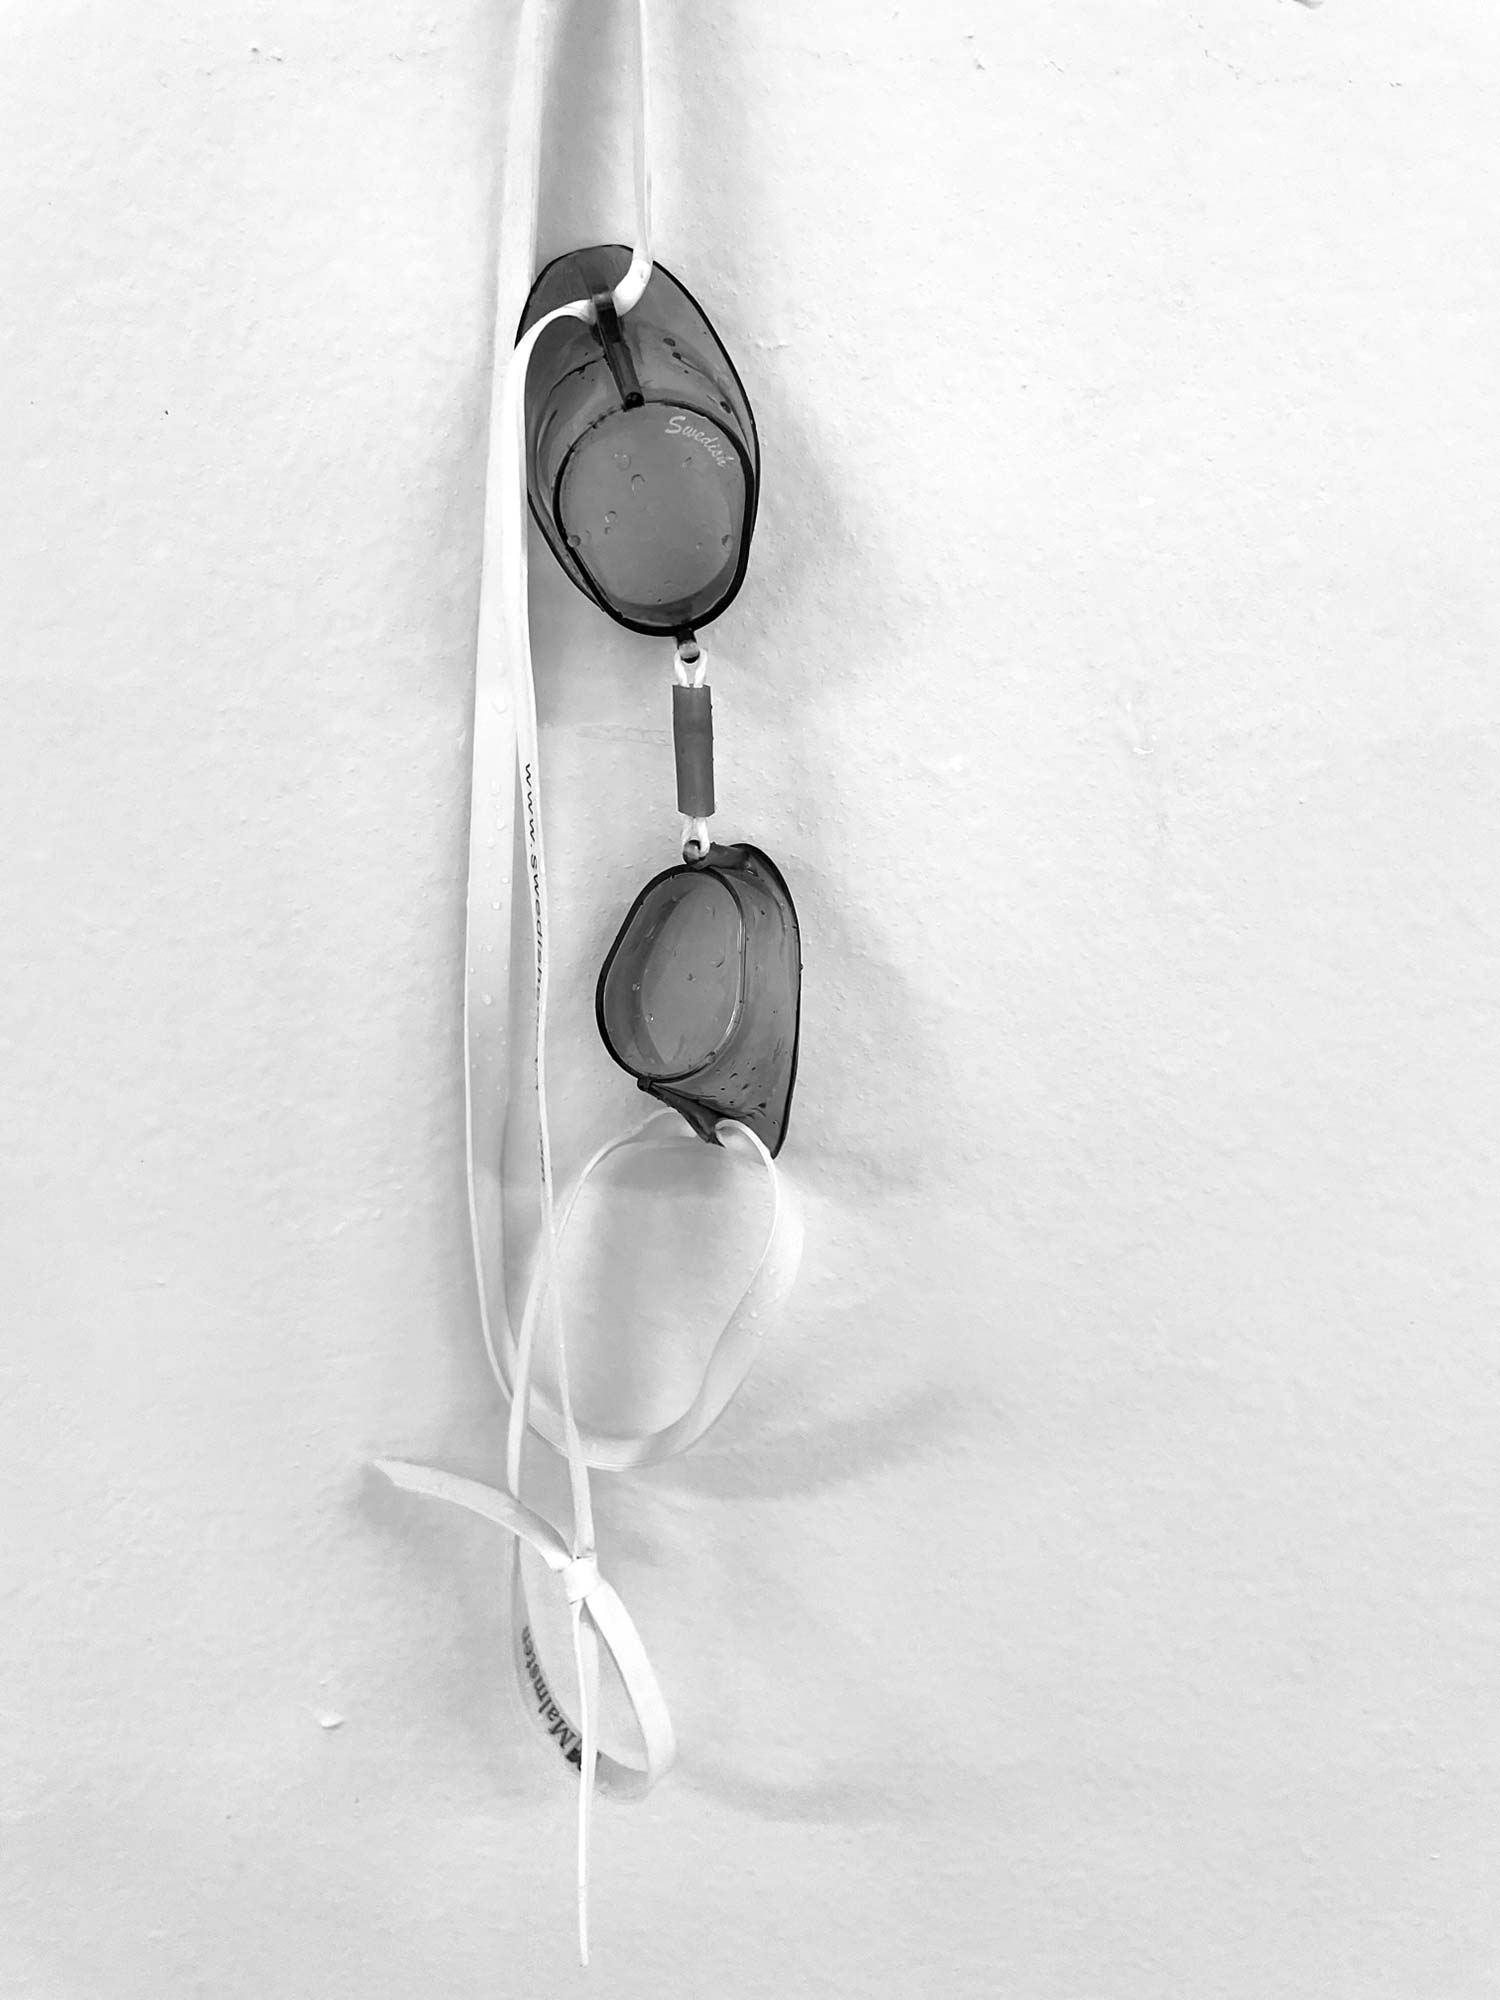 A set of Swedish goggles hanging from a hook on a wall